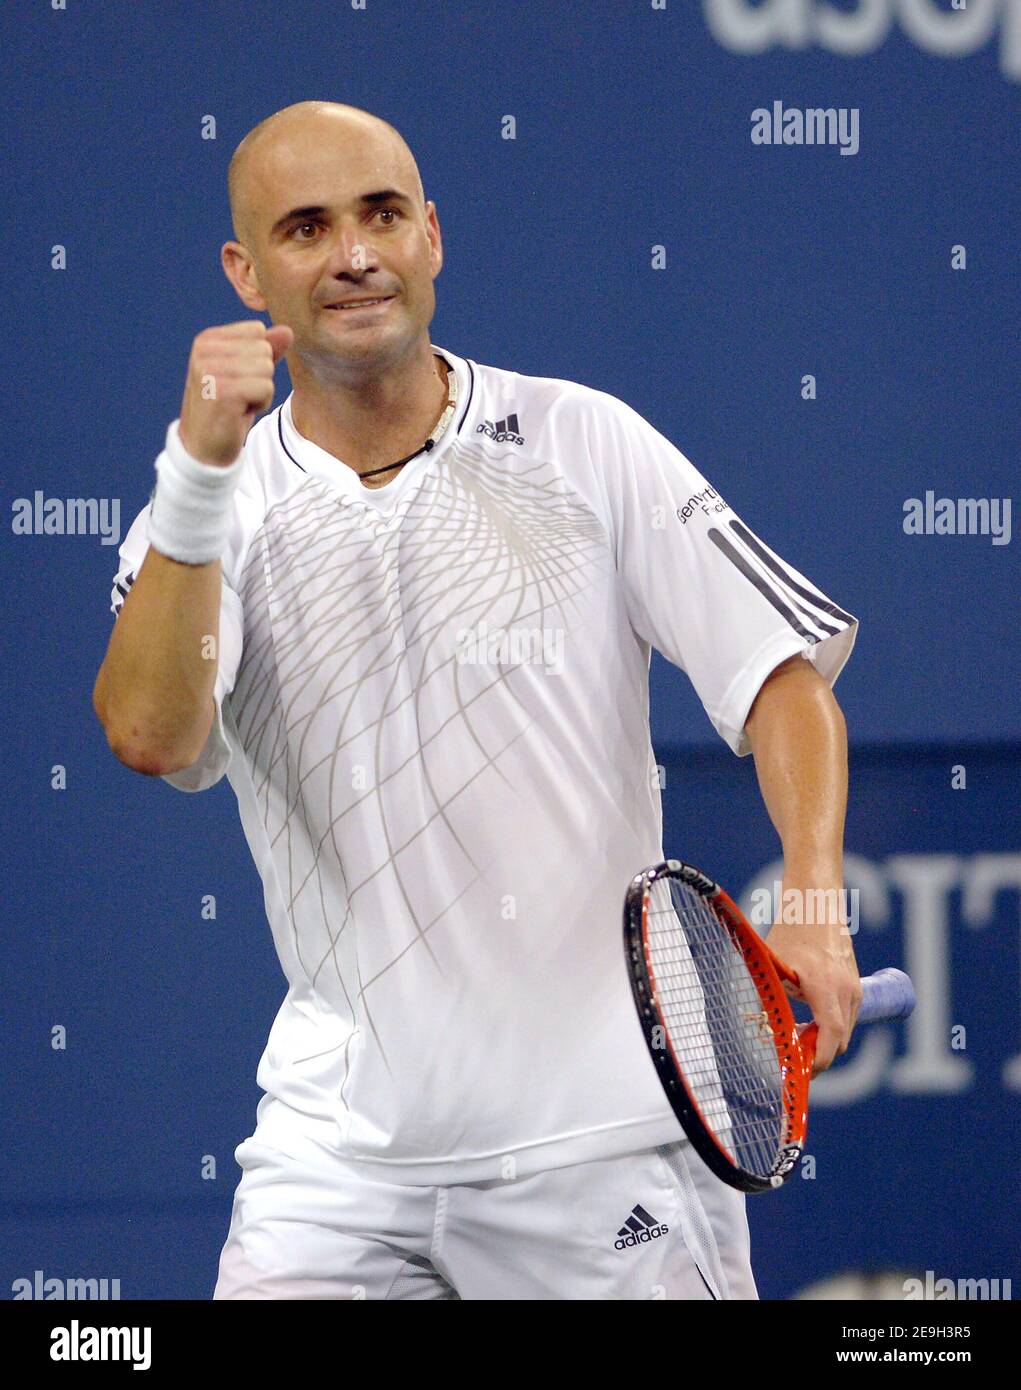 USA's Andre Agassi defeats Romania's Andrei Pavel in the 1st round of the  2006 US Open held at Flushing Meadow in New York City, NY, USA on August  28, 2006. The player